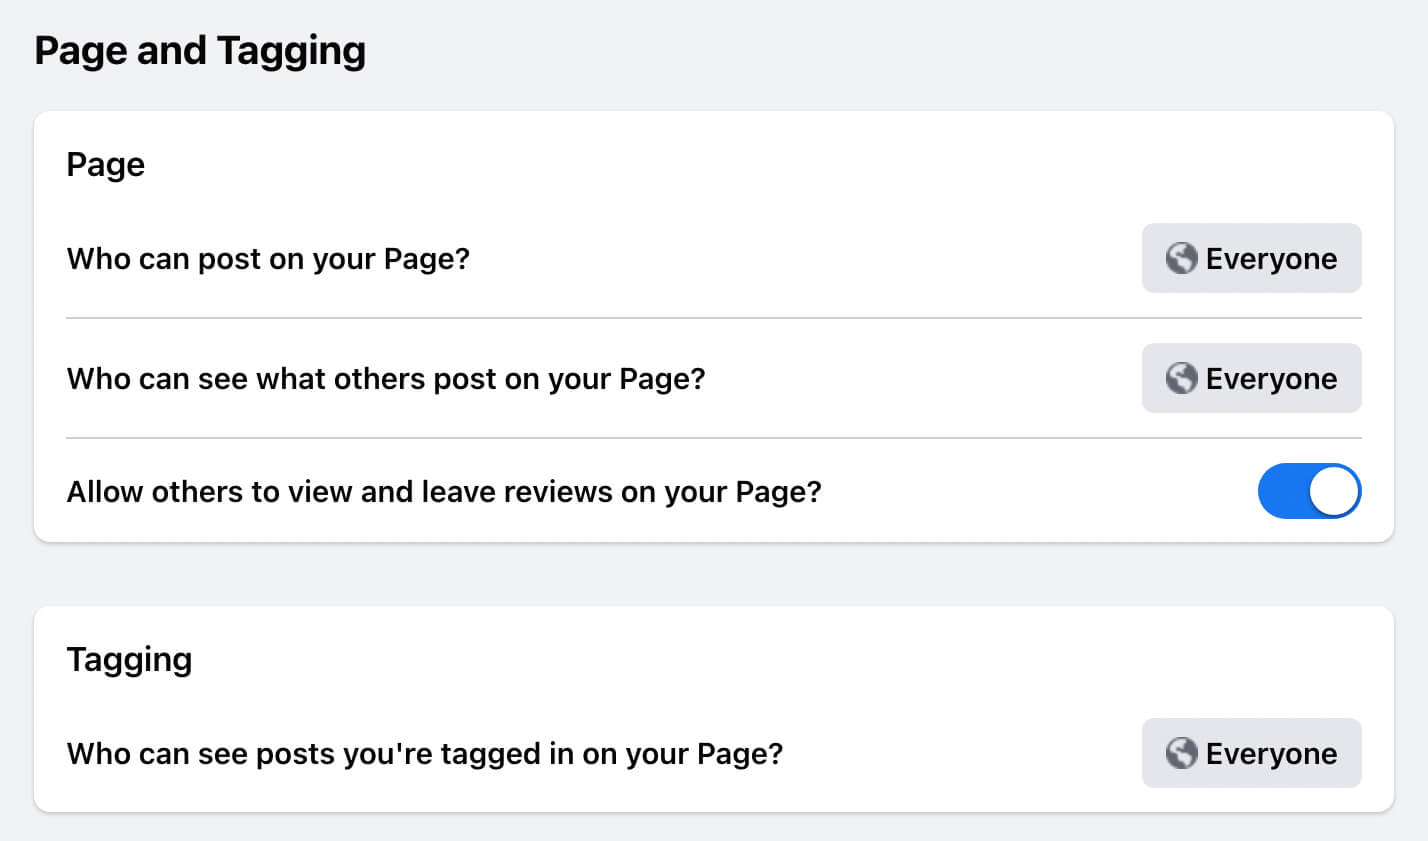 how-to-adjust-page-settings-and-connected-accounts-in-the-new-pages-experience-page-and-tagging-tab-prevent-pages-from-interacting-with-your-page-example-7